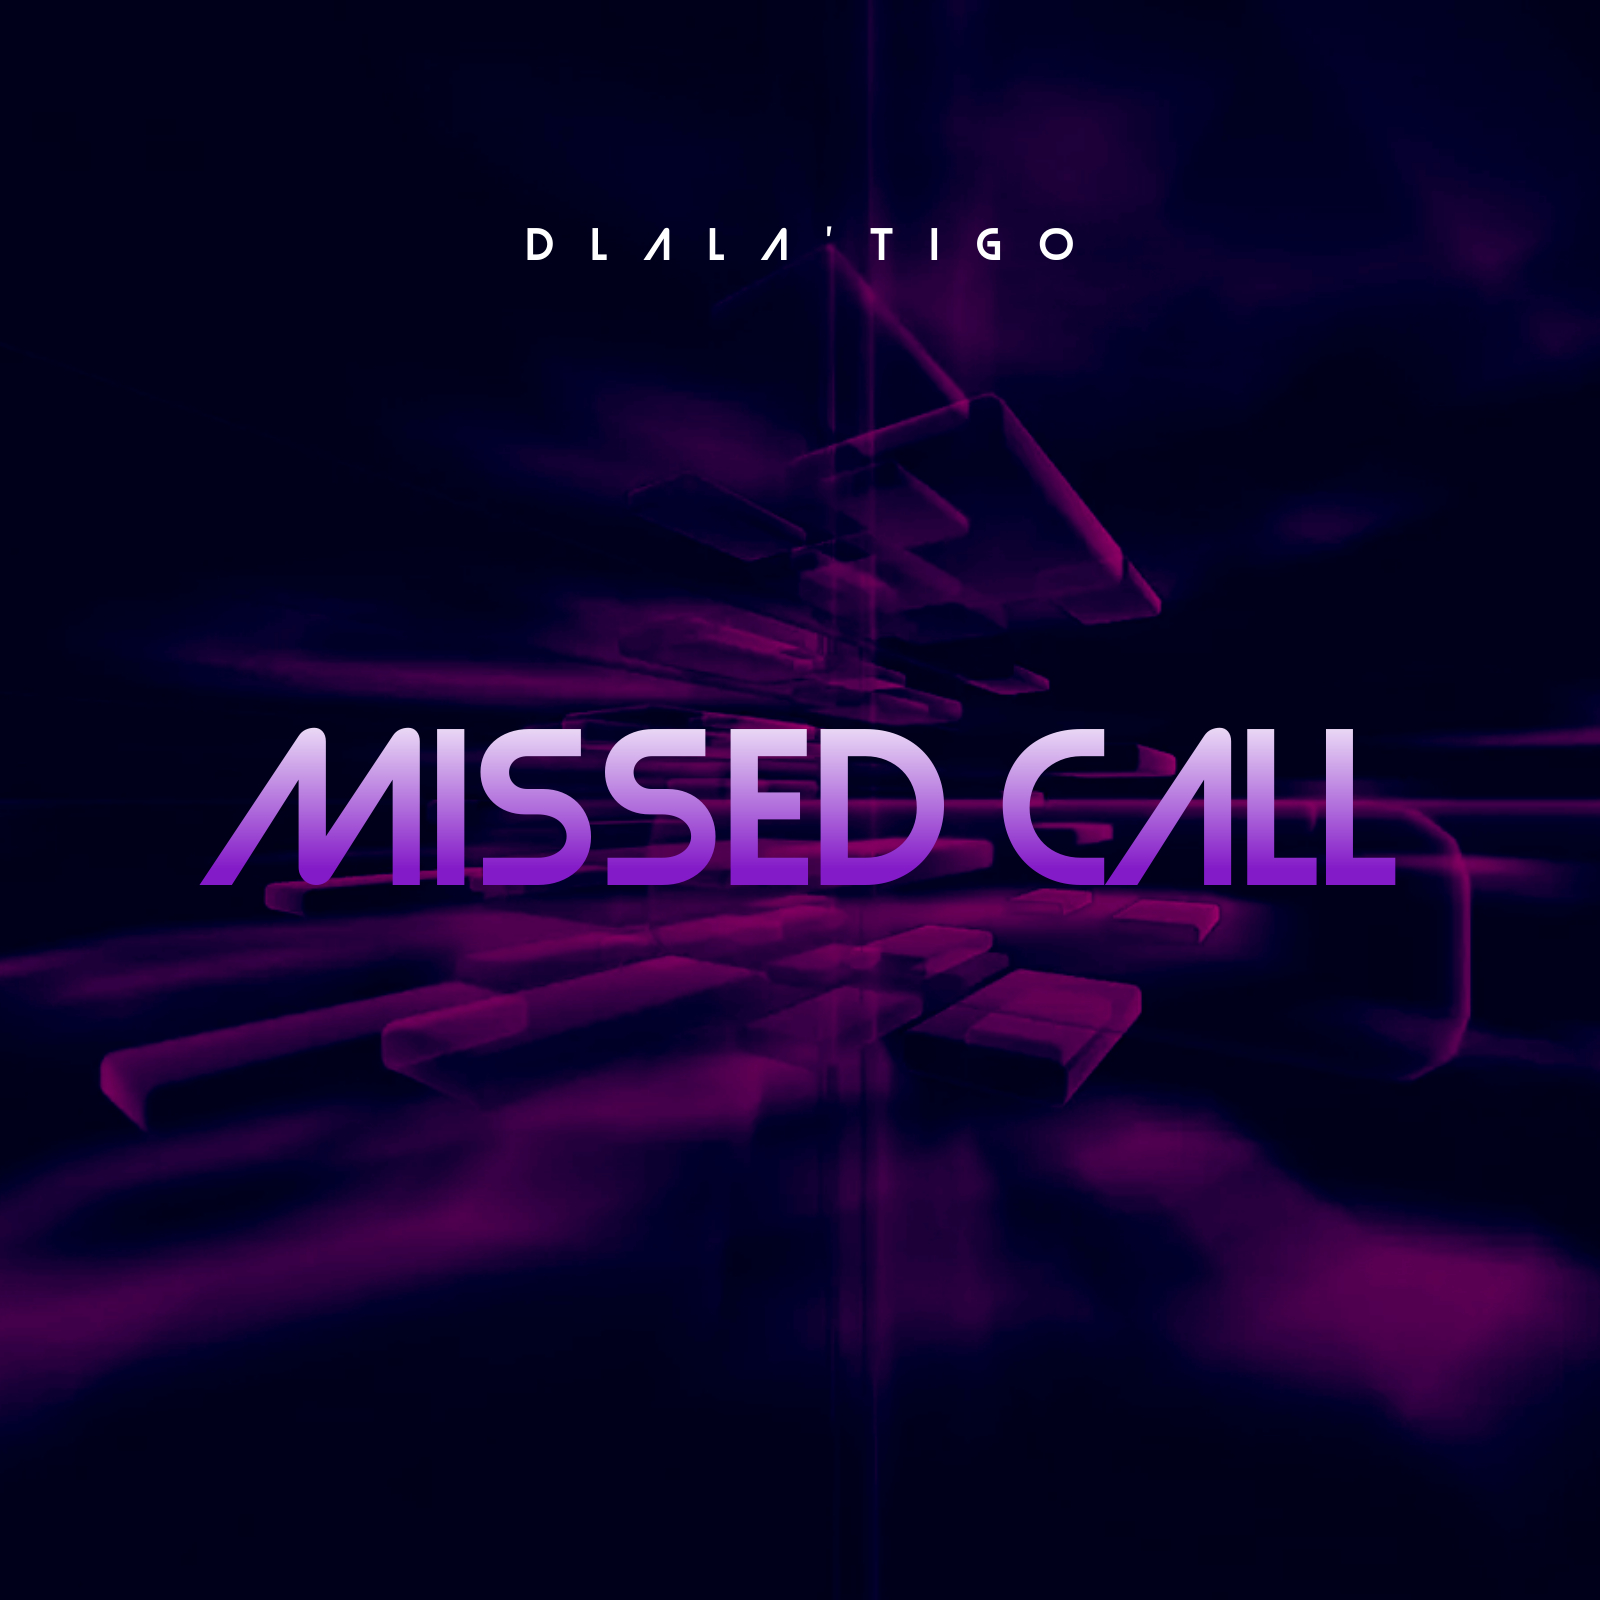 1714693514_Missed Call Art - Made with PosterMyWall.jpg